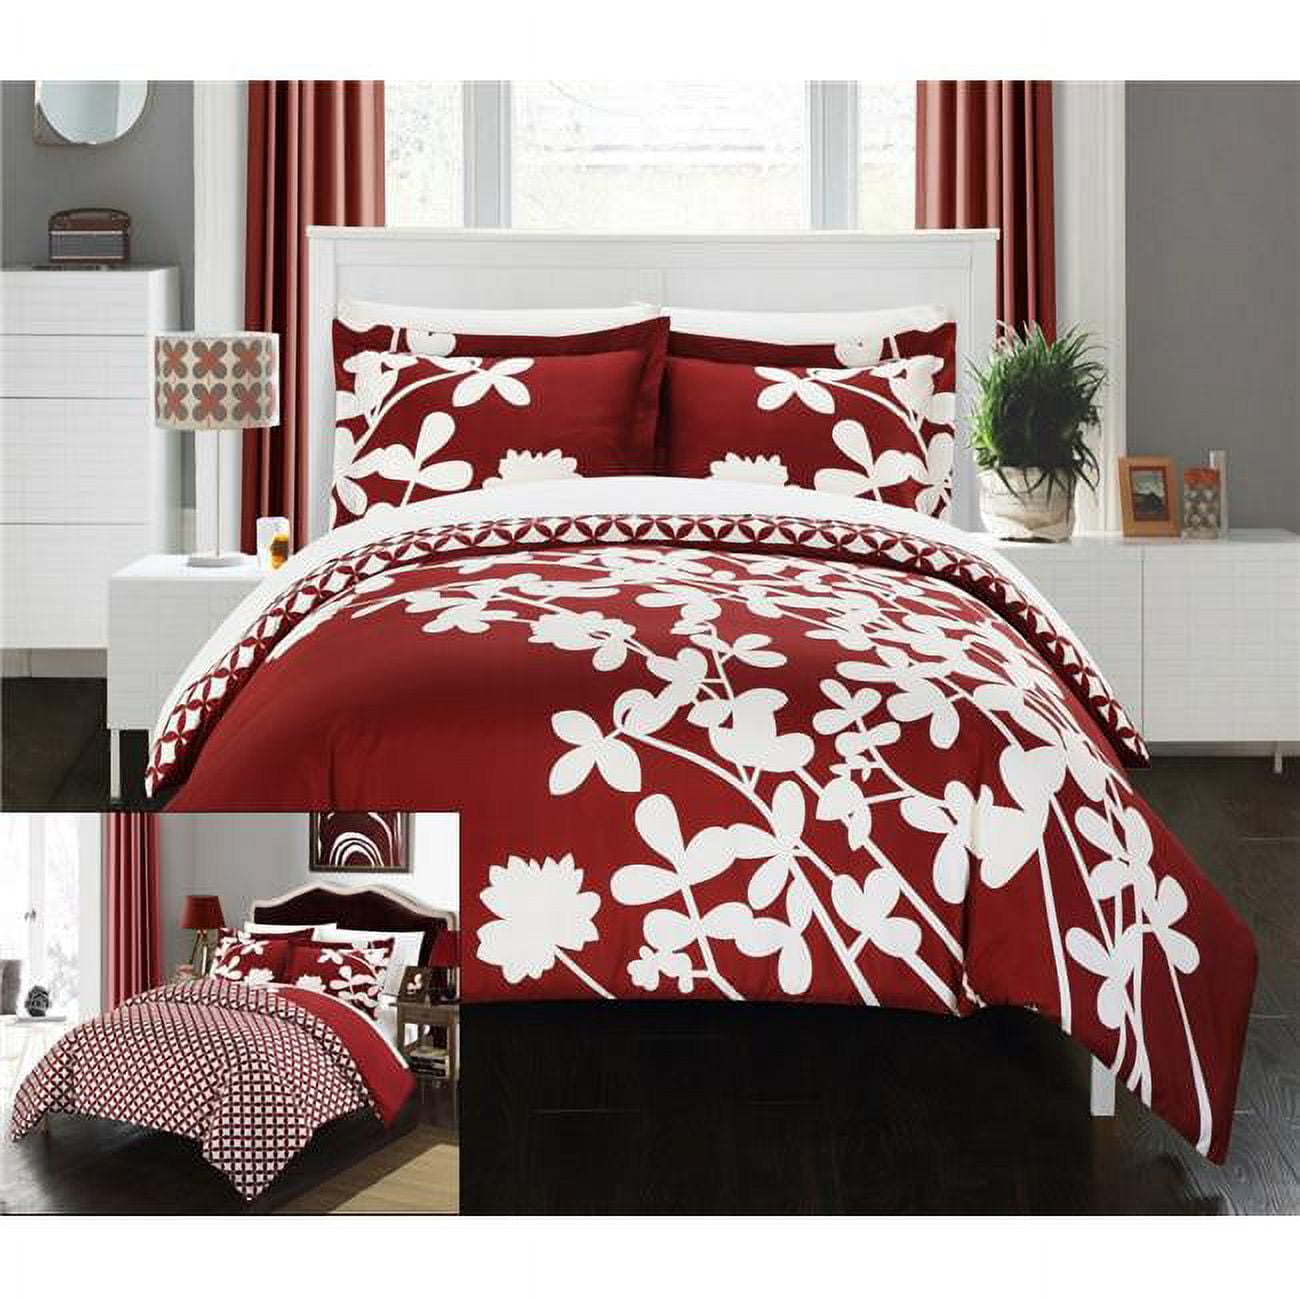 Sweetpea Reversible Scale Floral Design Printed With Diamond Pattern Reverse Duvet Cover Set - Red - Queen & Large - 3 Piece